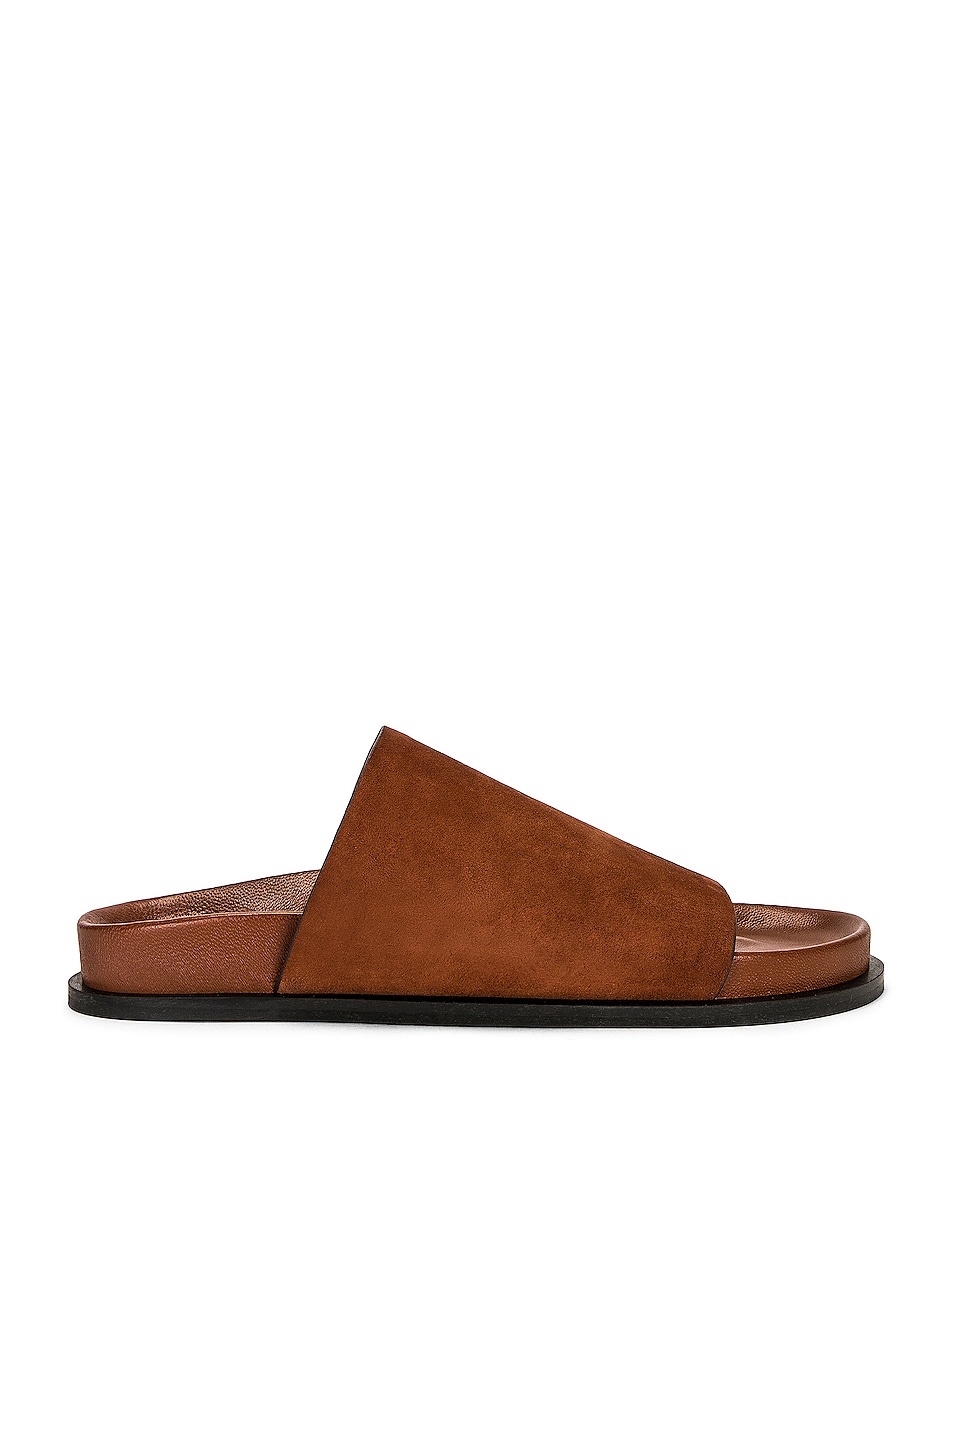 Image 1 of A.EMERY Luca Sandal in Sienna